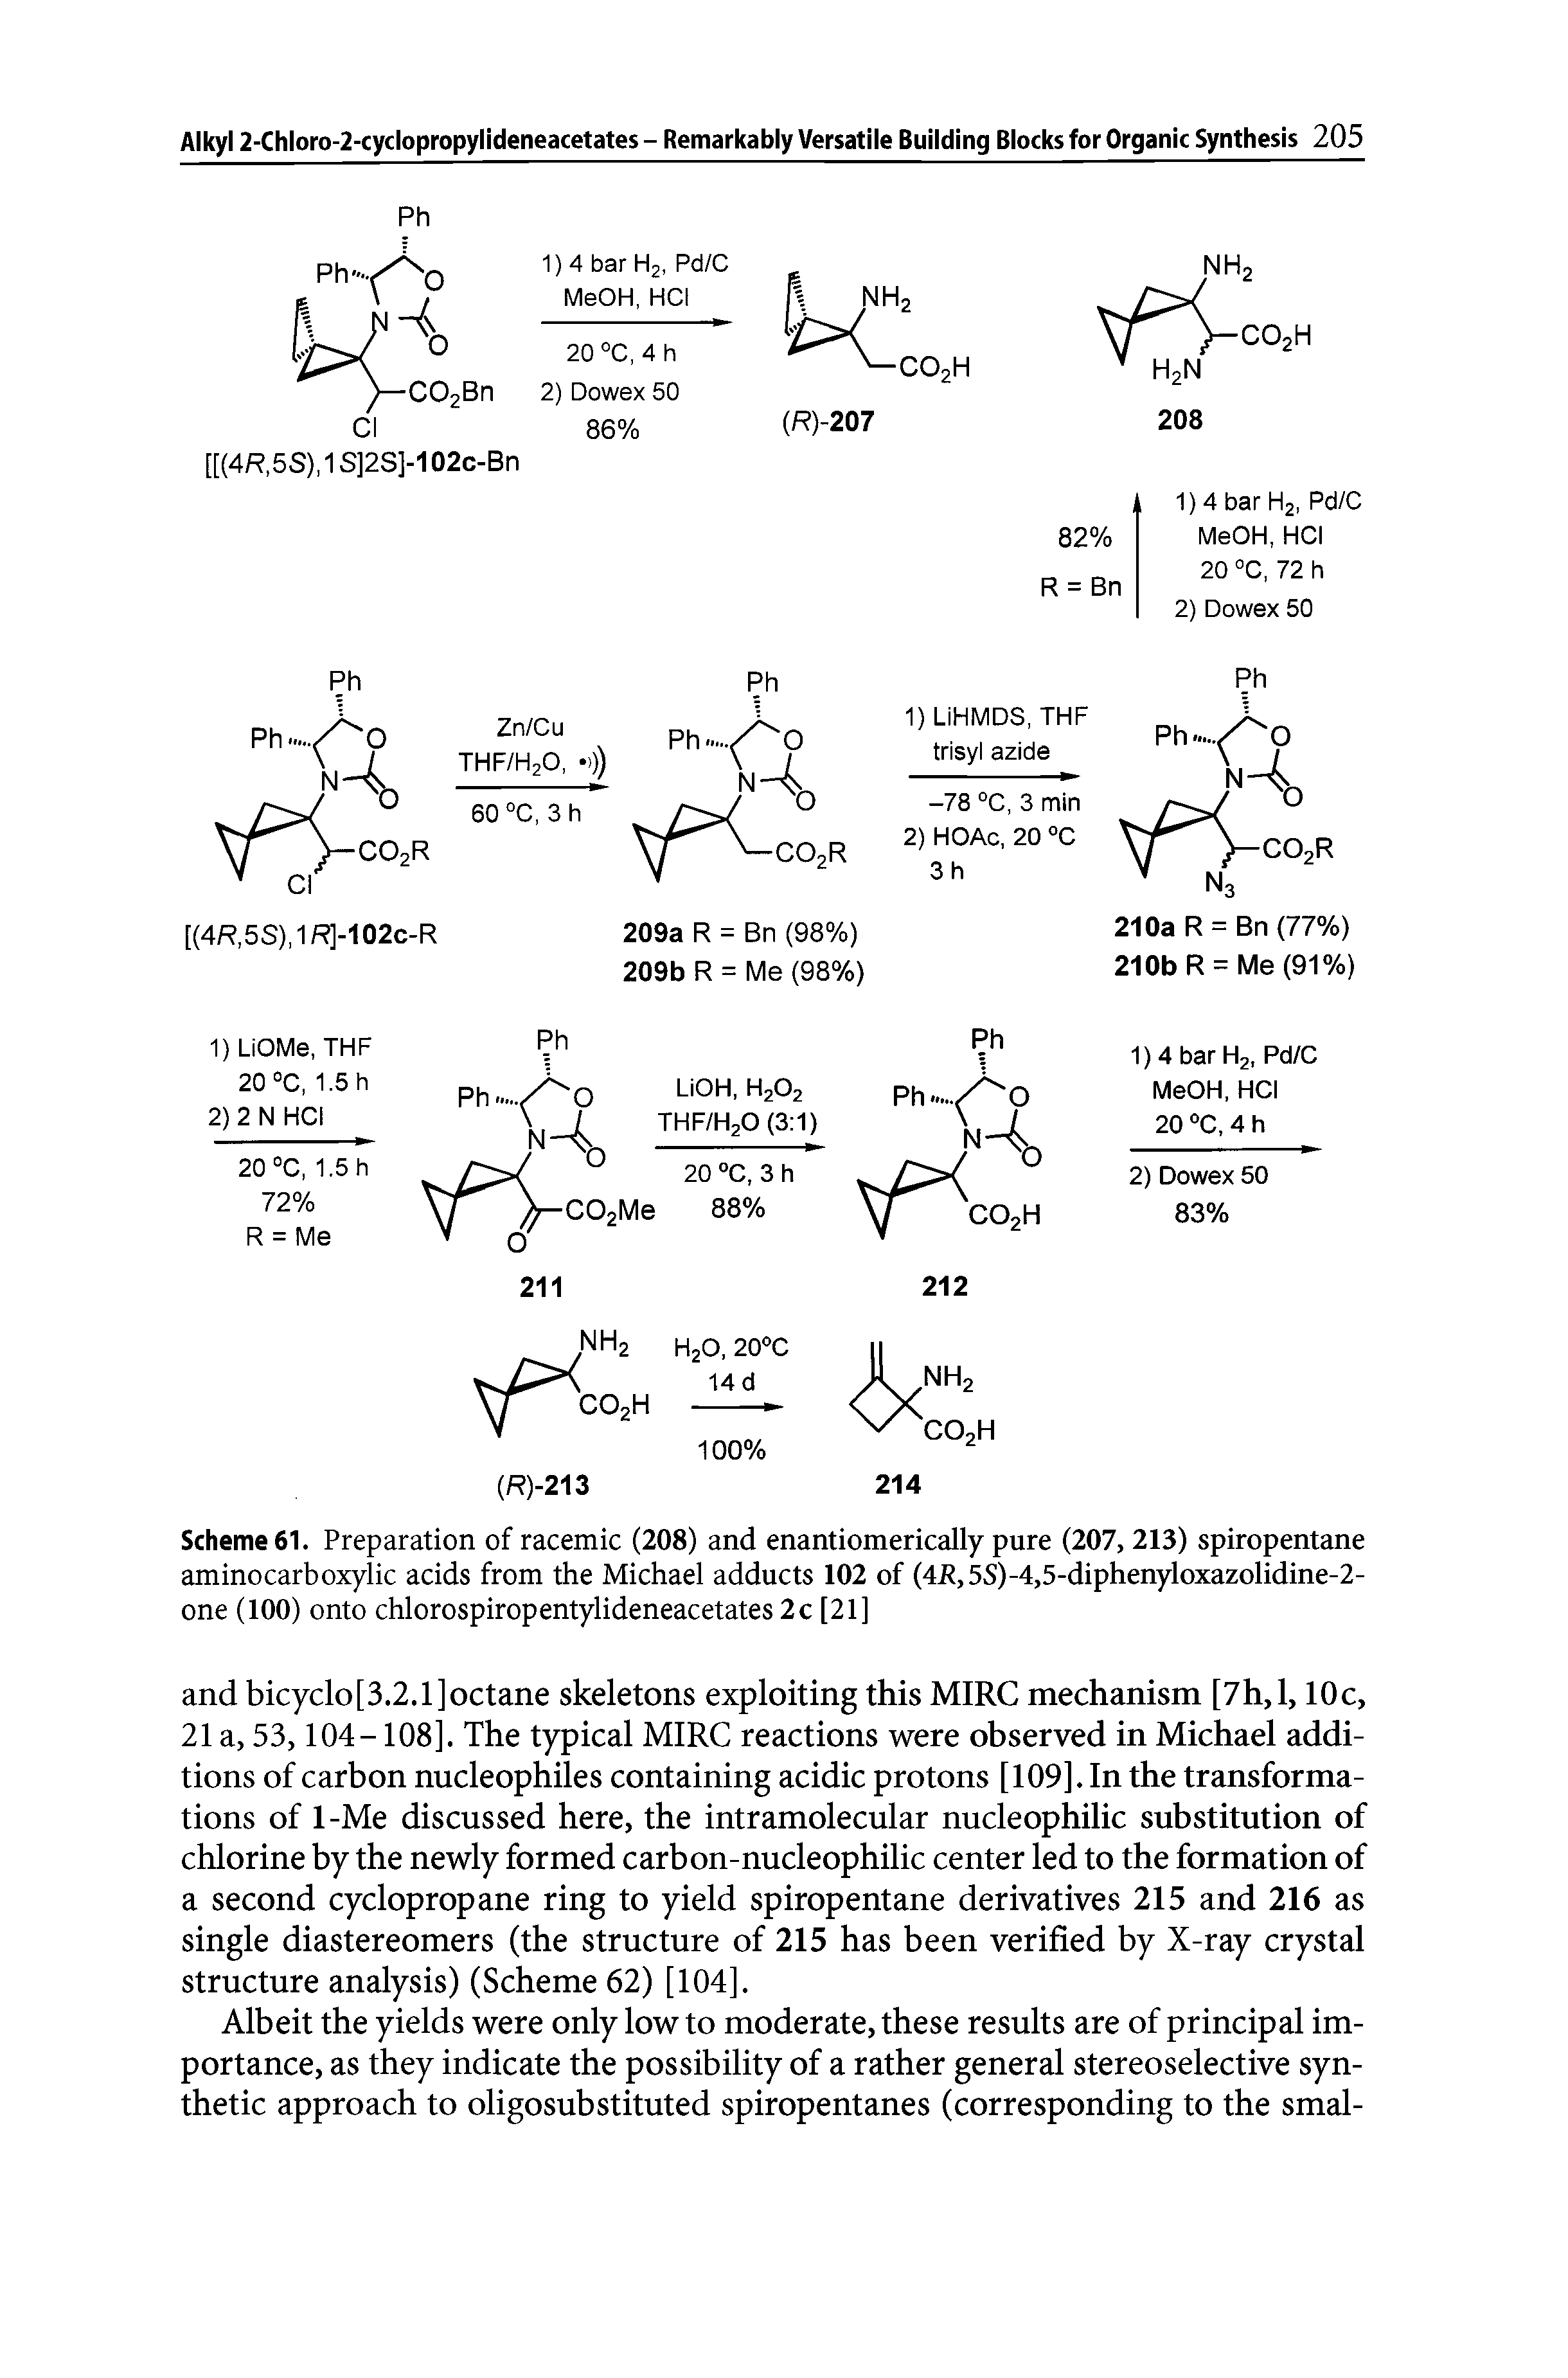 Scheme 61. Preparation of racemic (208) and enantiomerically pure (207, 213) spiropentane aminocarboxylic acids from the Michael adducts 102 of (4J ,5S)-4,5-diphenyloxazolidine-2-one (100) onto chlorospiropentylideneacetates 2 c [21]...